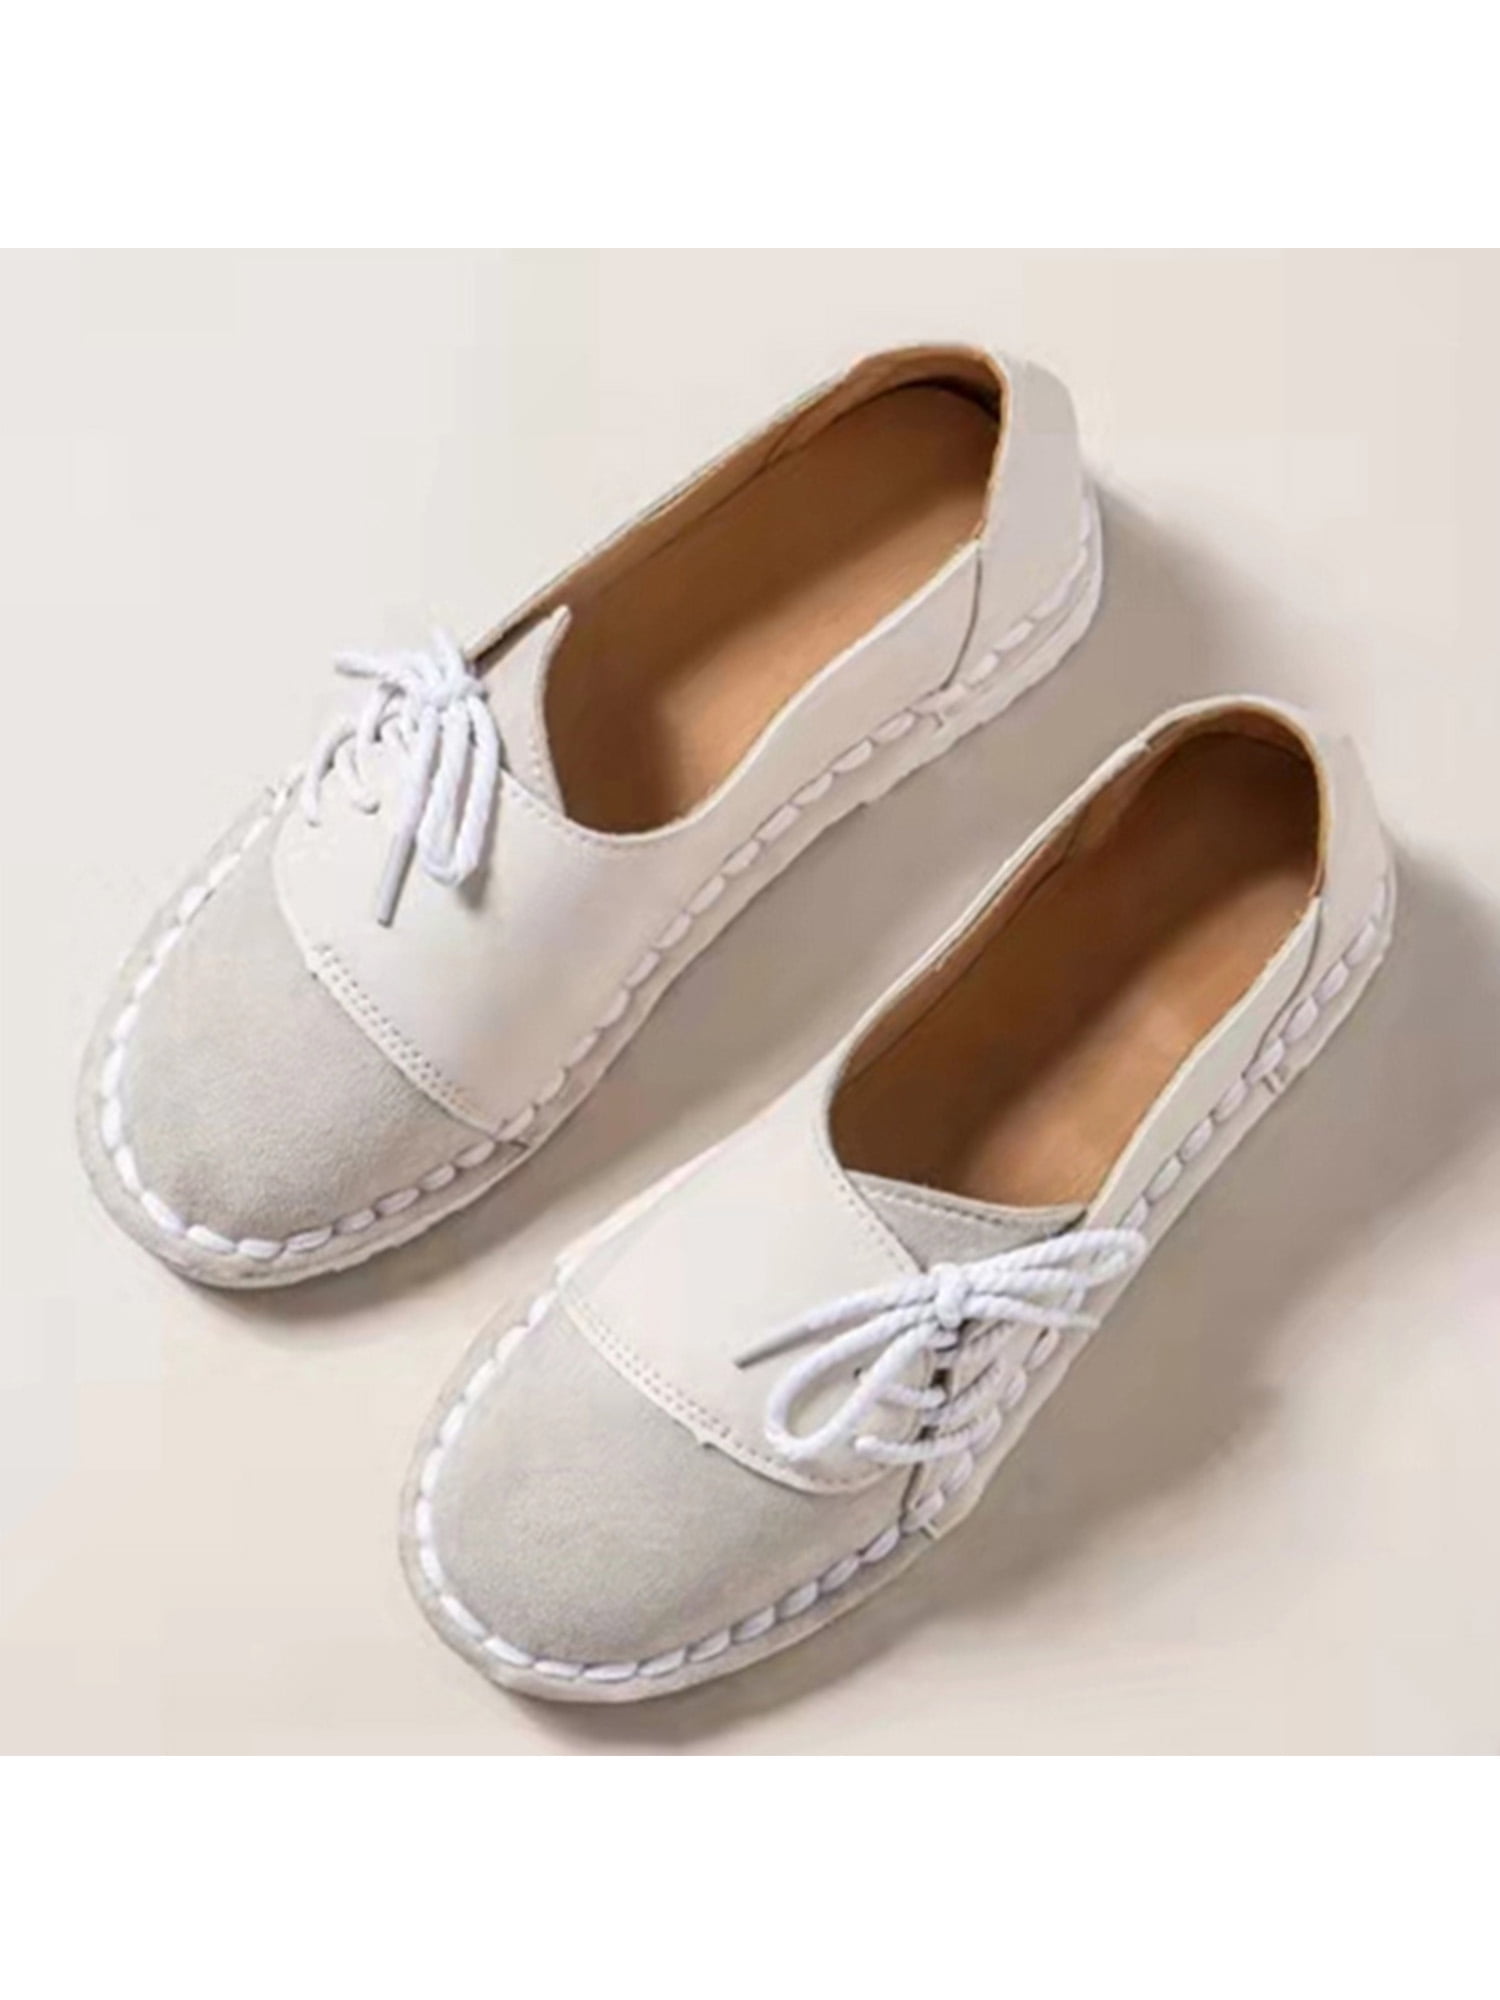 Womens Slip On Casual Walking Sneakers Comfortable Loafers Flats US 5-11